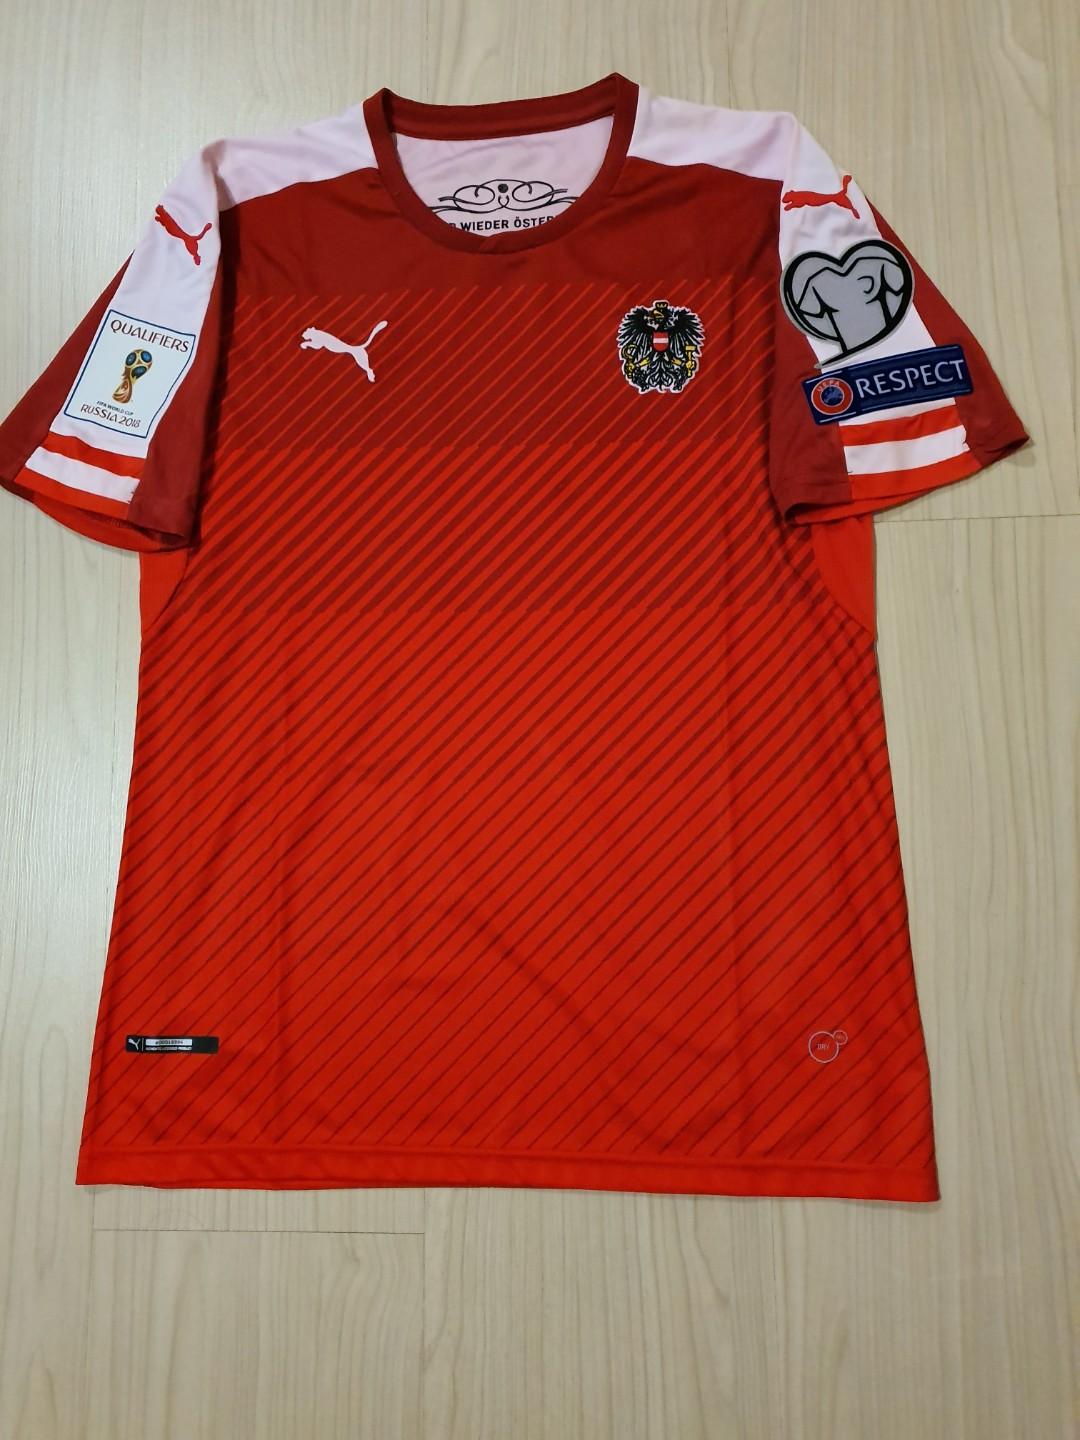 Austria World Cup Soccer Jersey size S 